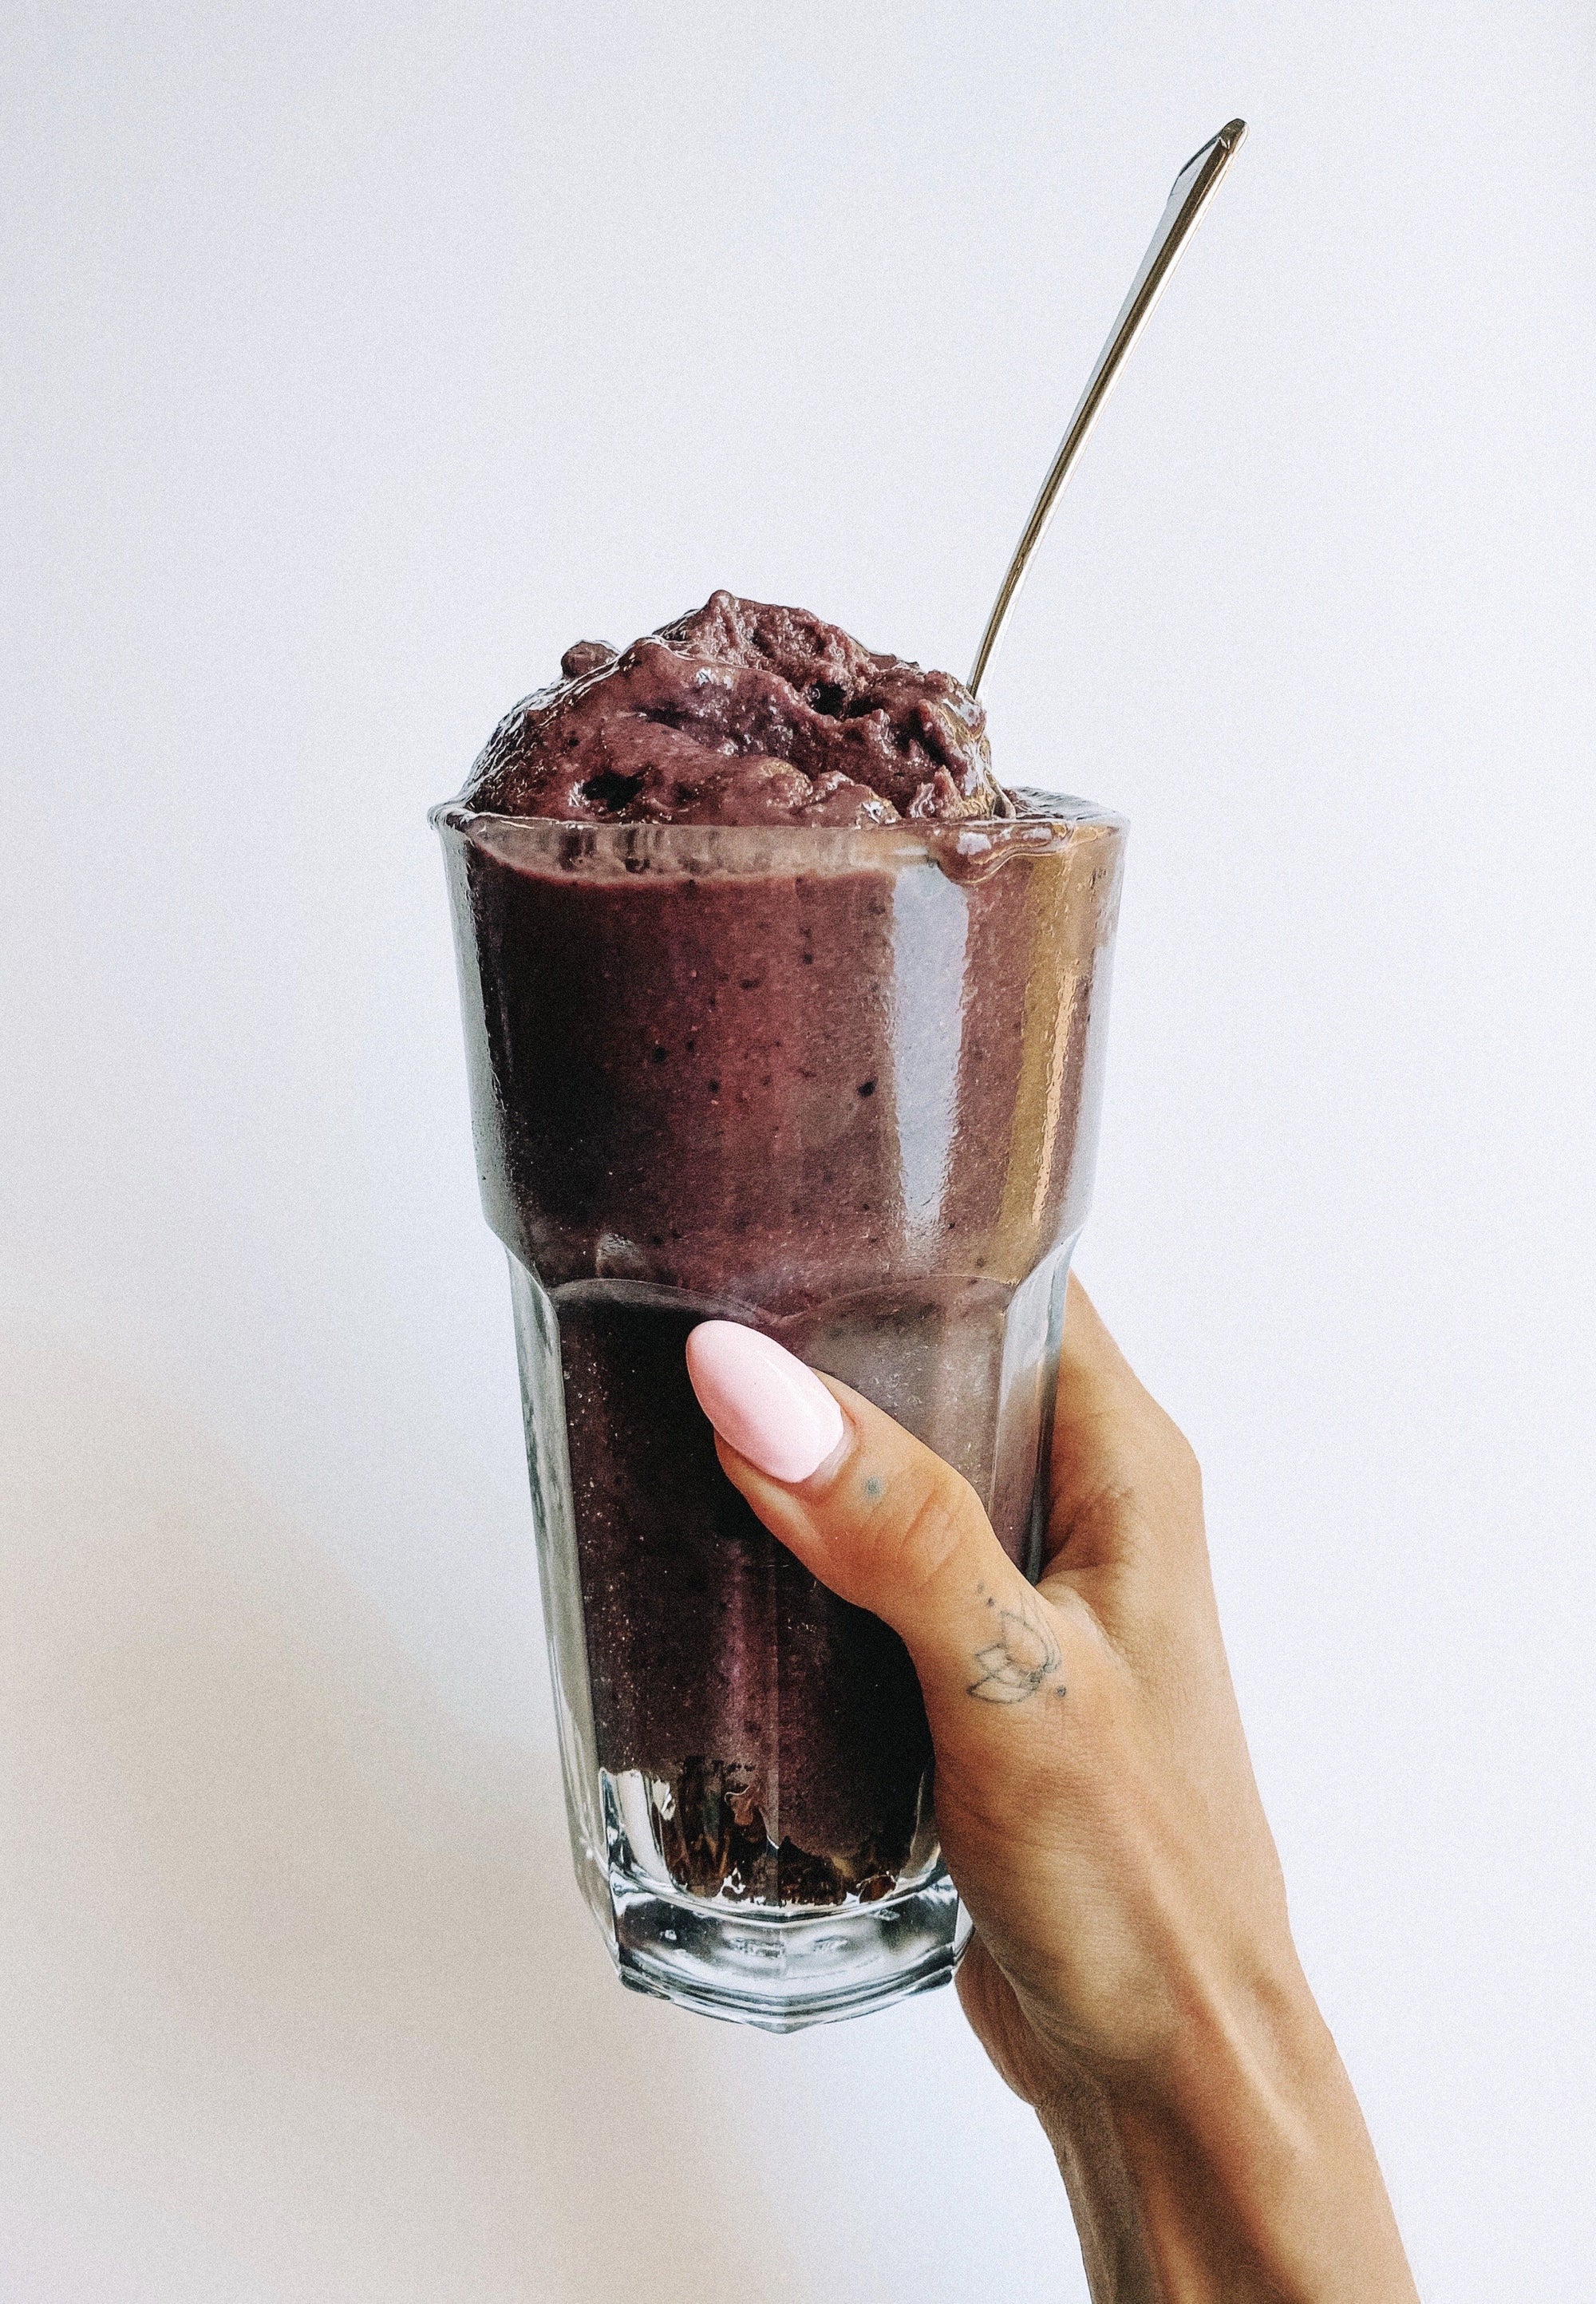 Vegan and paleo Cherry Garcia Smoothie made with JOYÀ Bliss cacao elixir blend